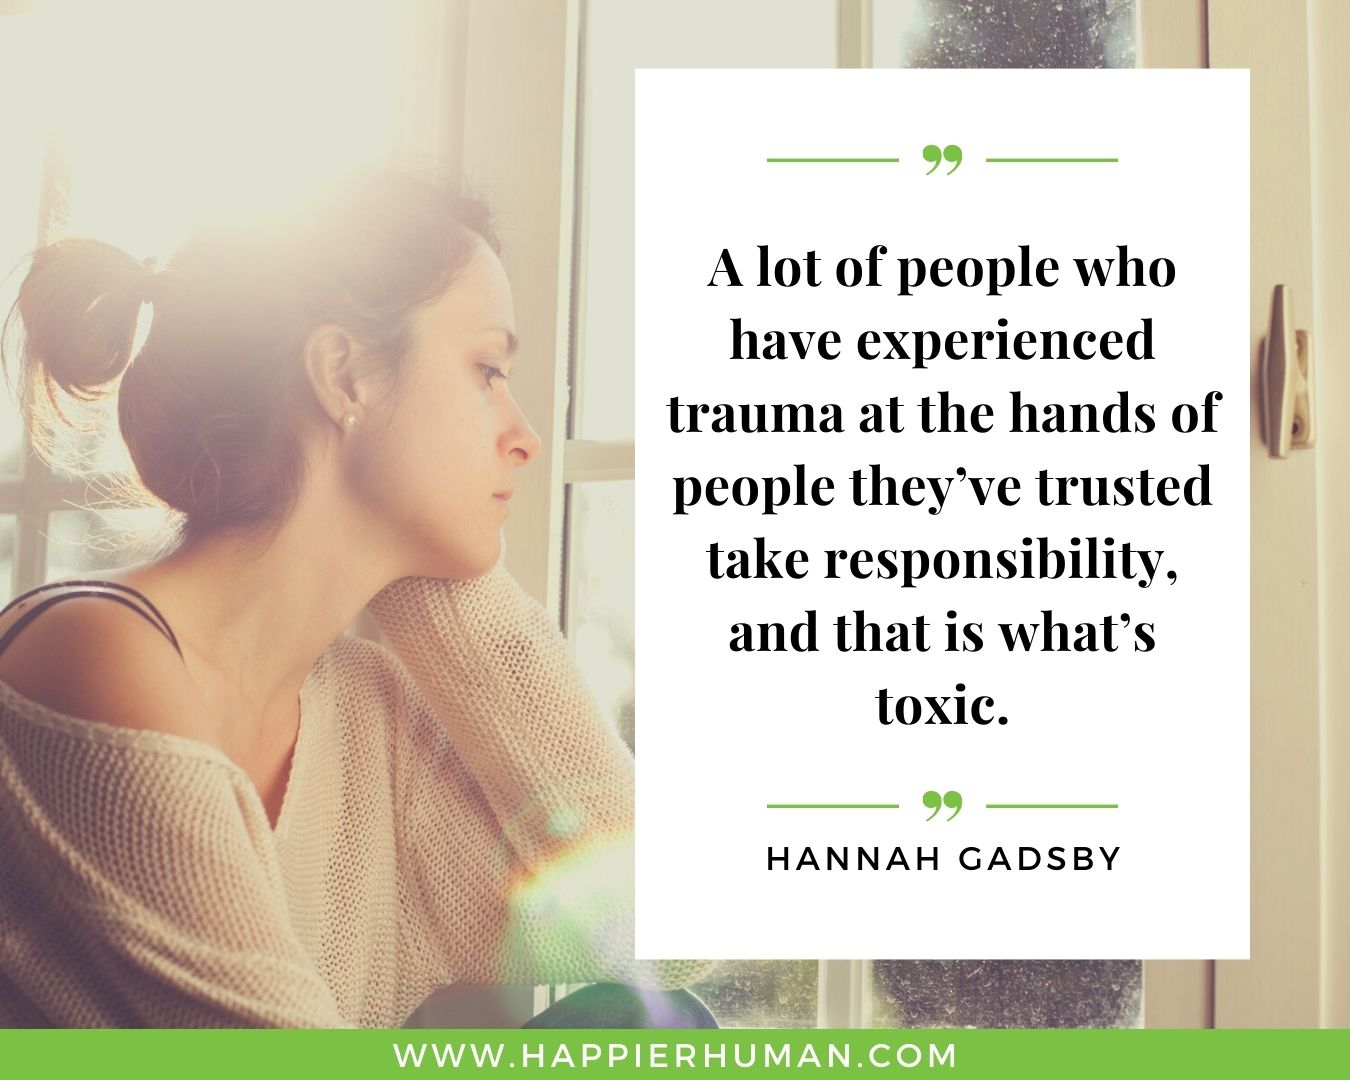 Toxic People Quotes - “A lot of people who have experienced trauma at the hands of people they’ve trusted take responsibility, and that is what’s toxic.” – Hannah Gadsby